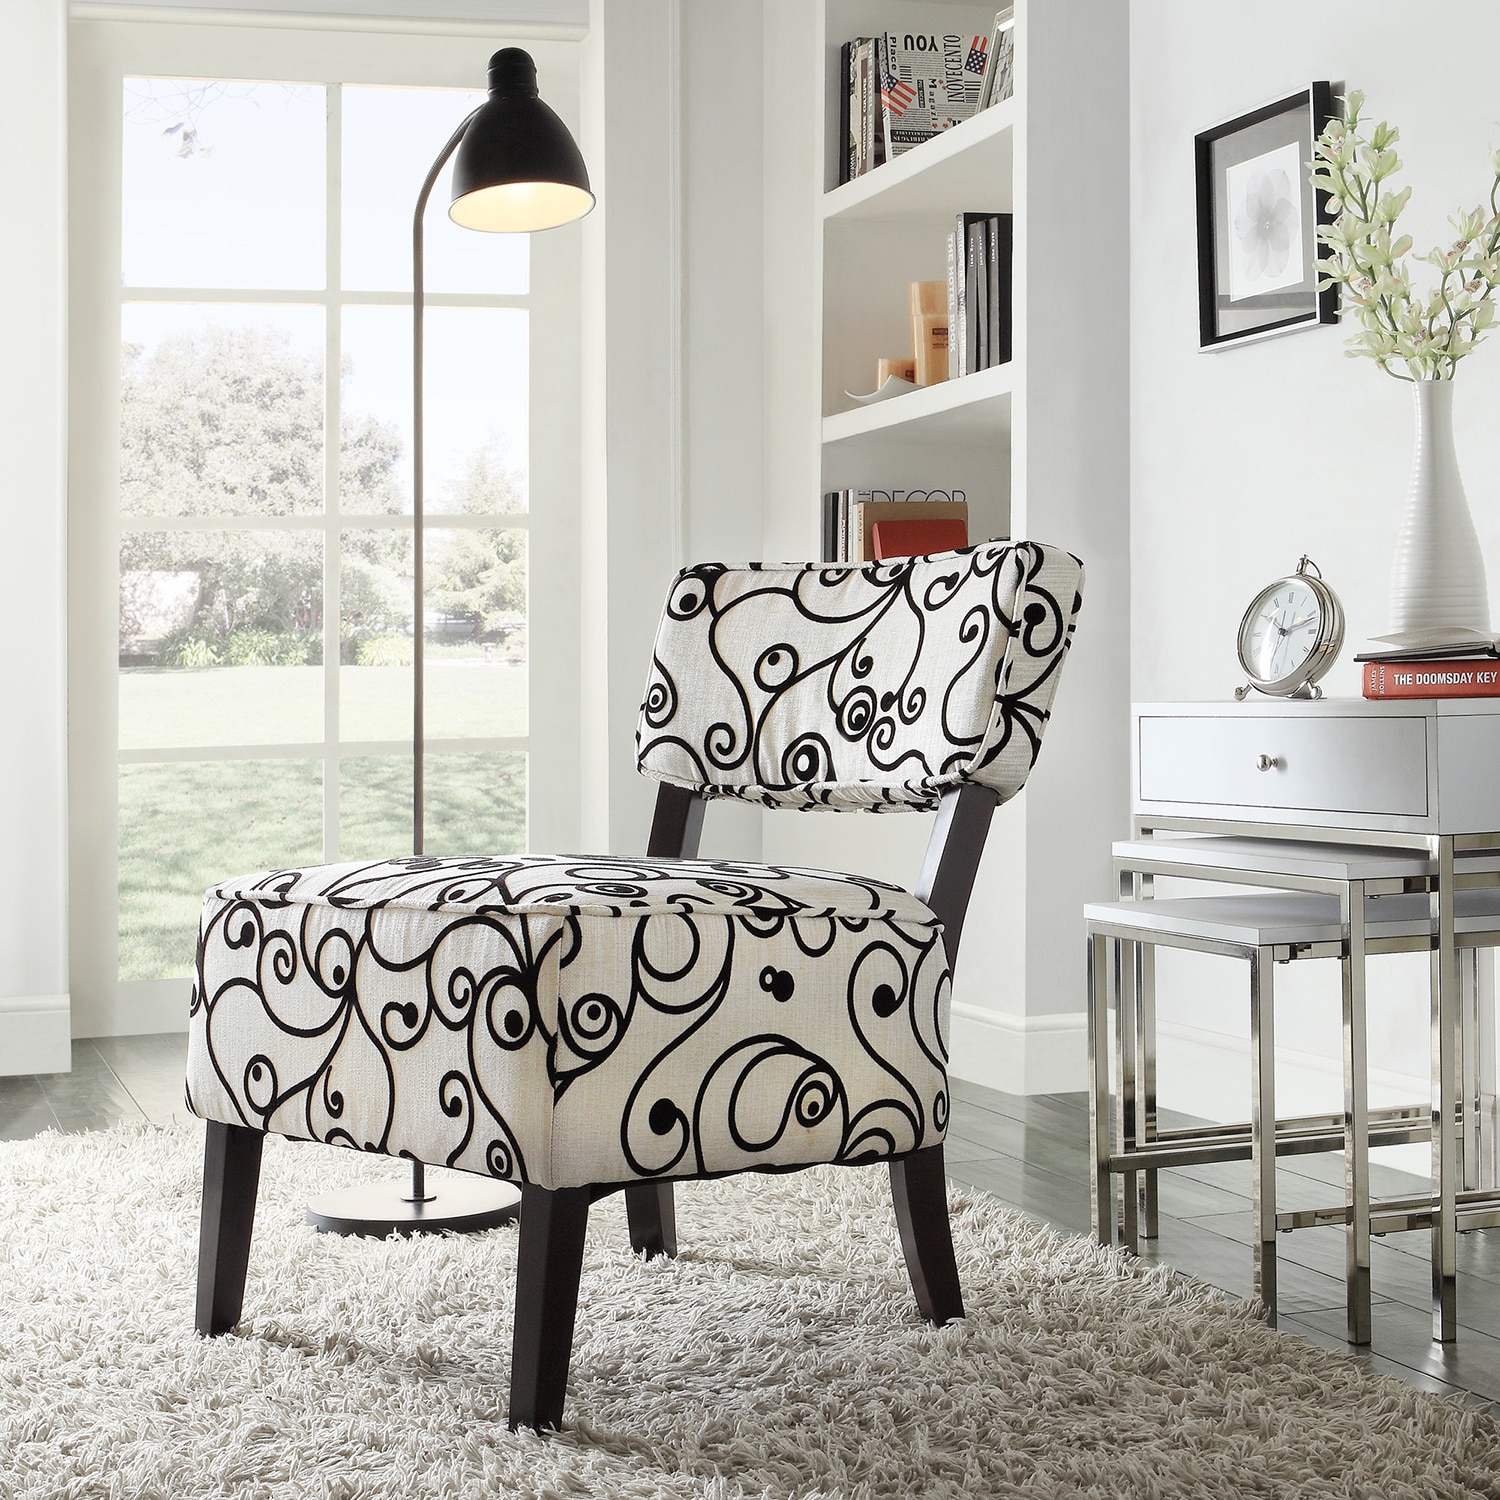 Tribecca Home Elko Swirl Print Armless Curved Back Accent Chair